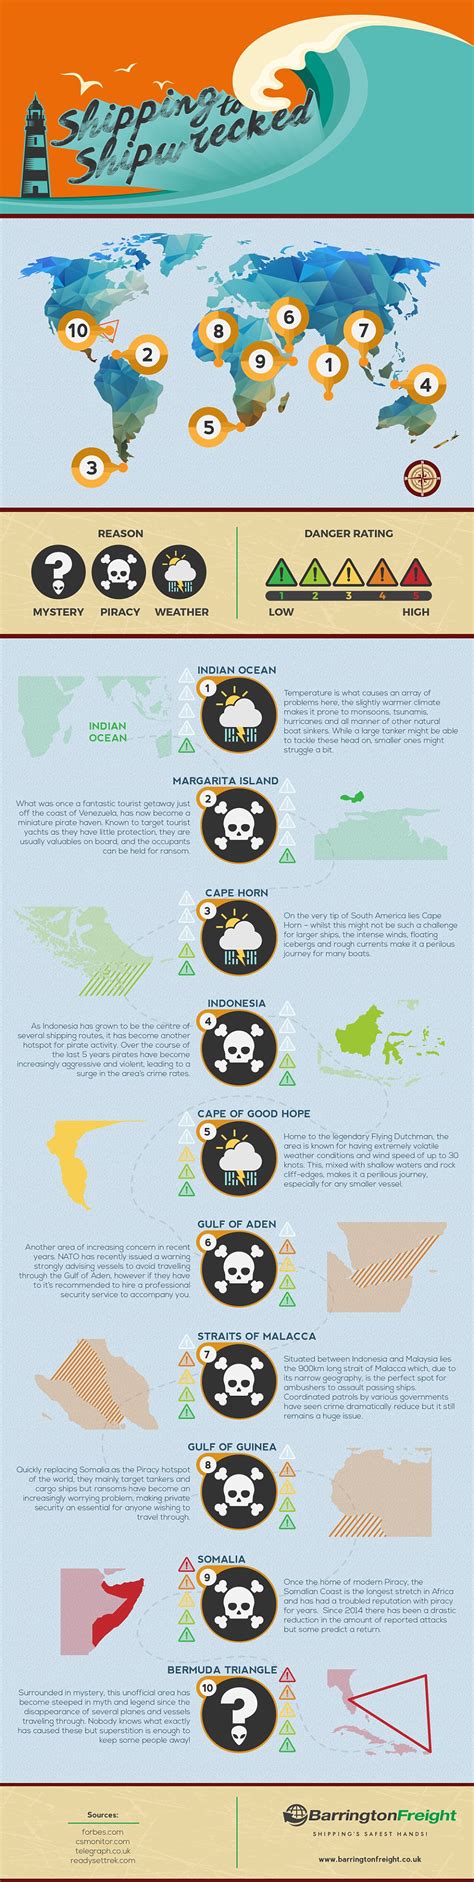 The Top Most Dangerous Areas Of The Sea Revealed